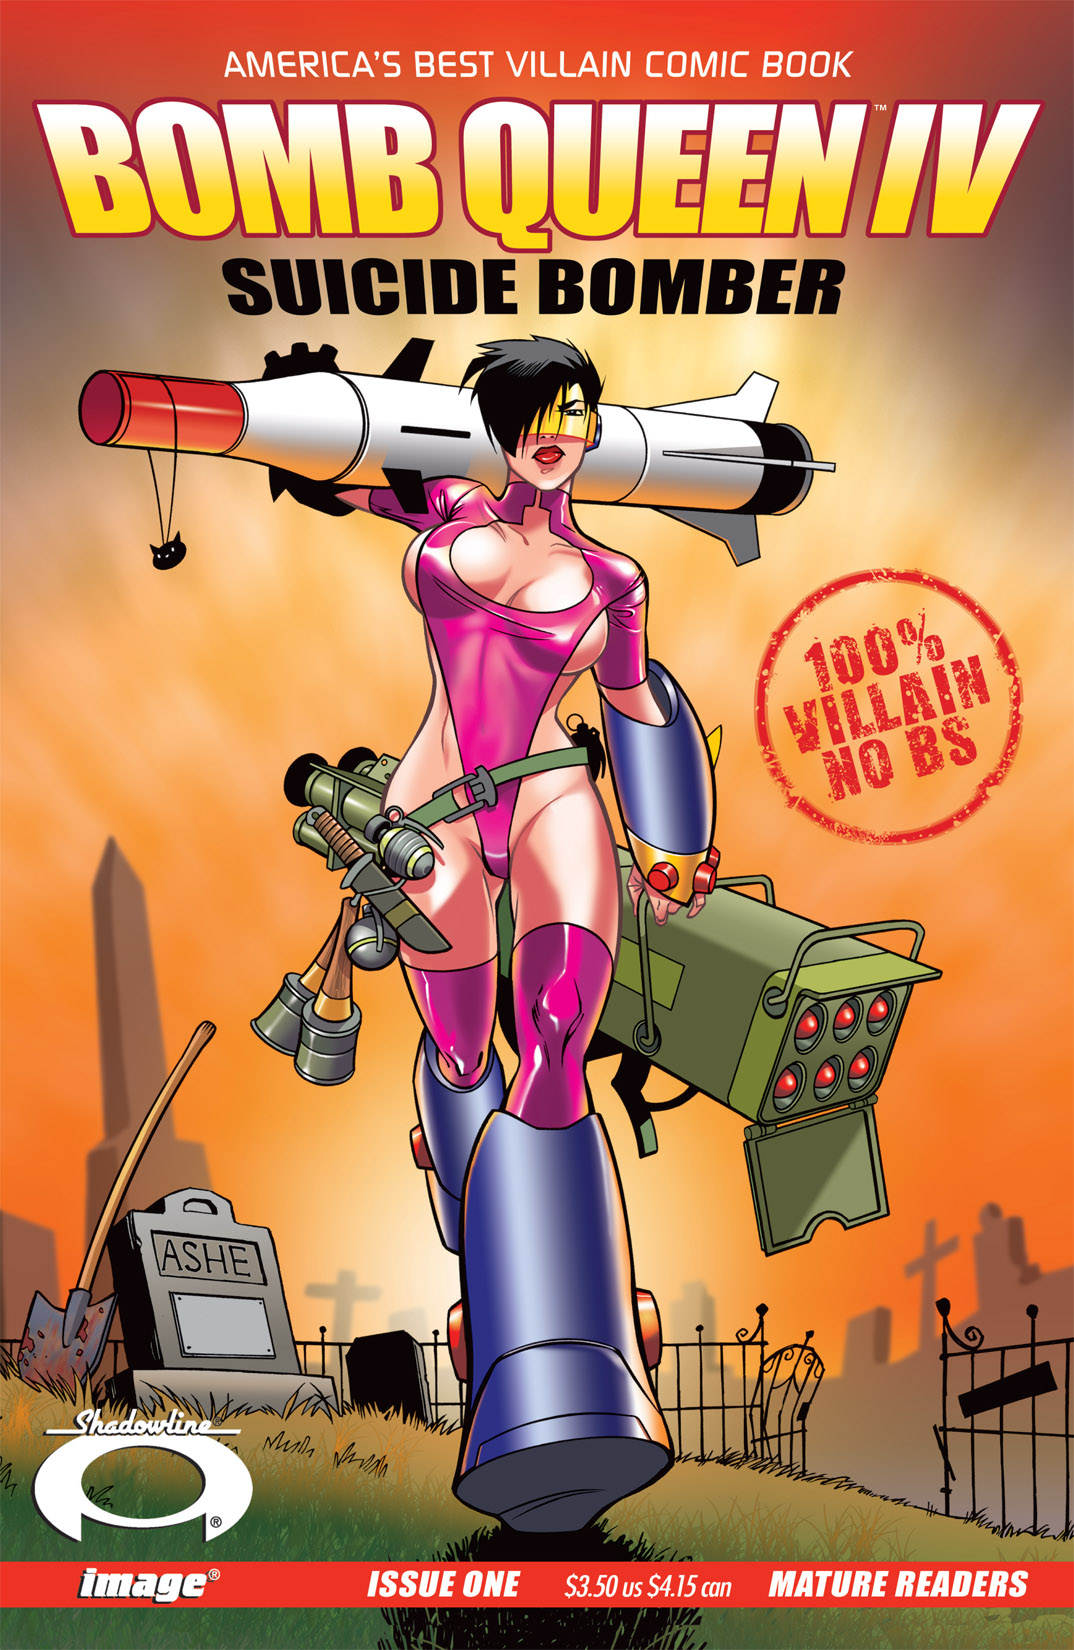 Read online Bomb Queen IV: Suicide Bomber comic -  Issue #1 - 1